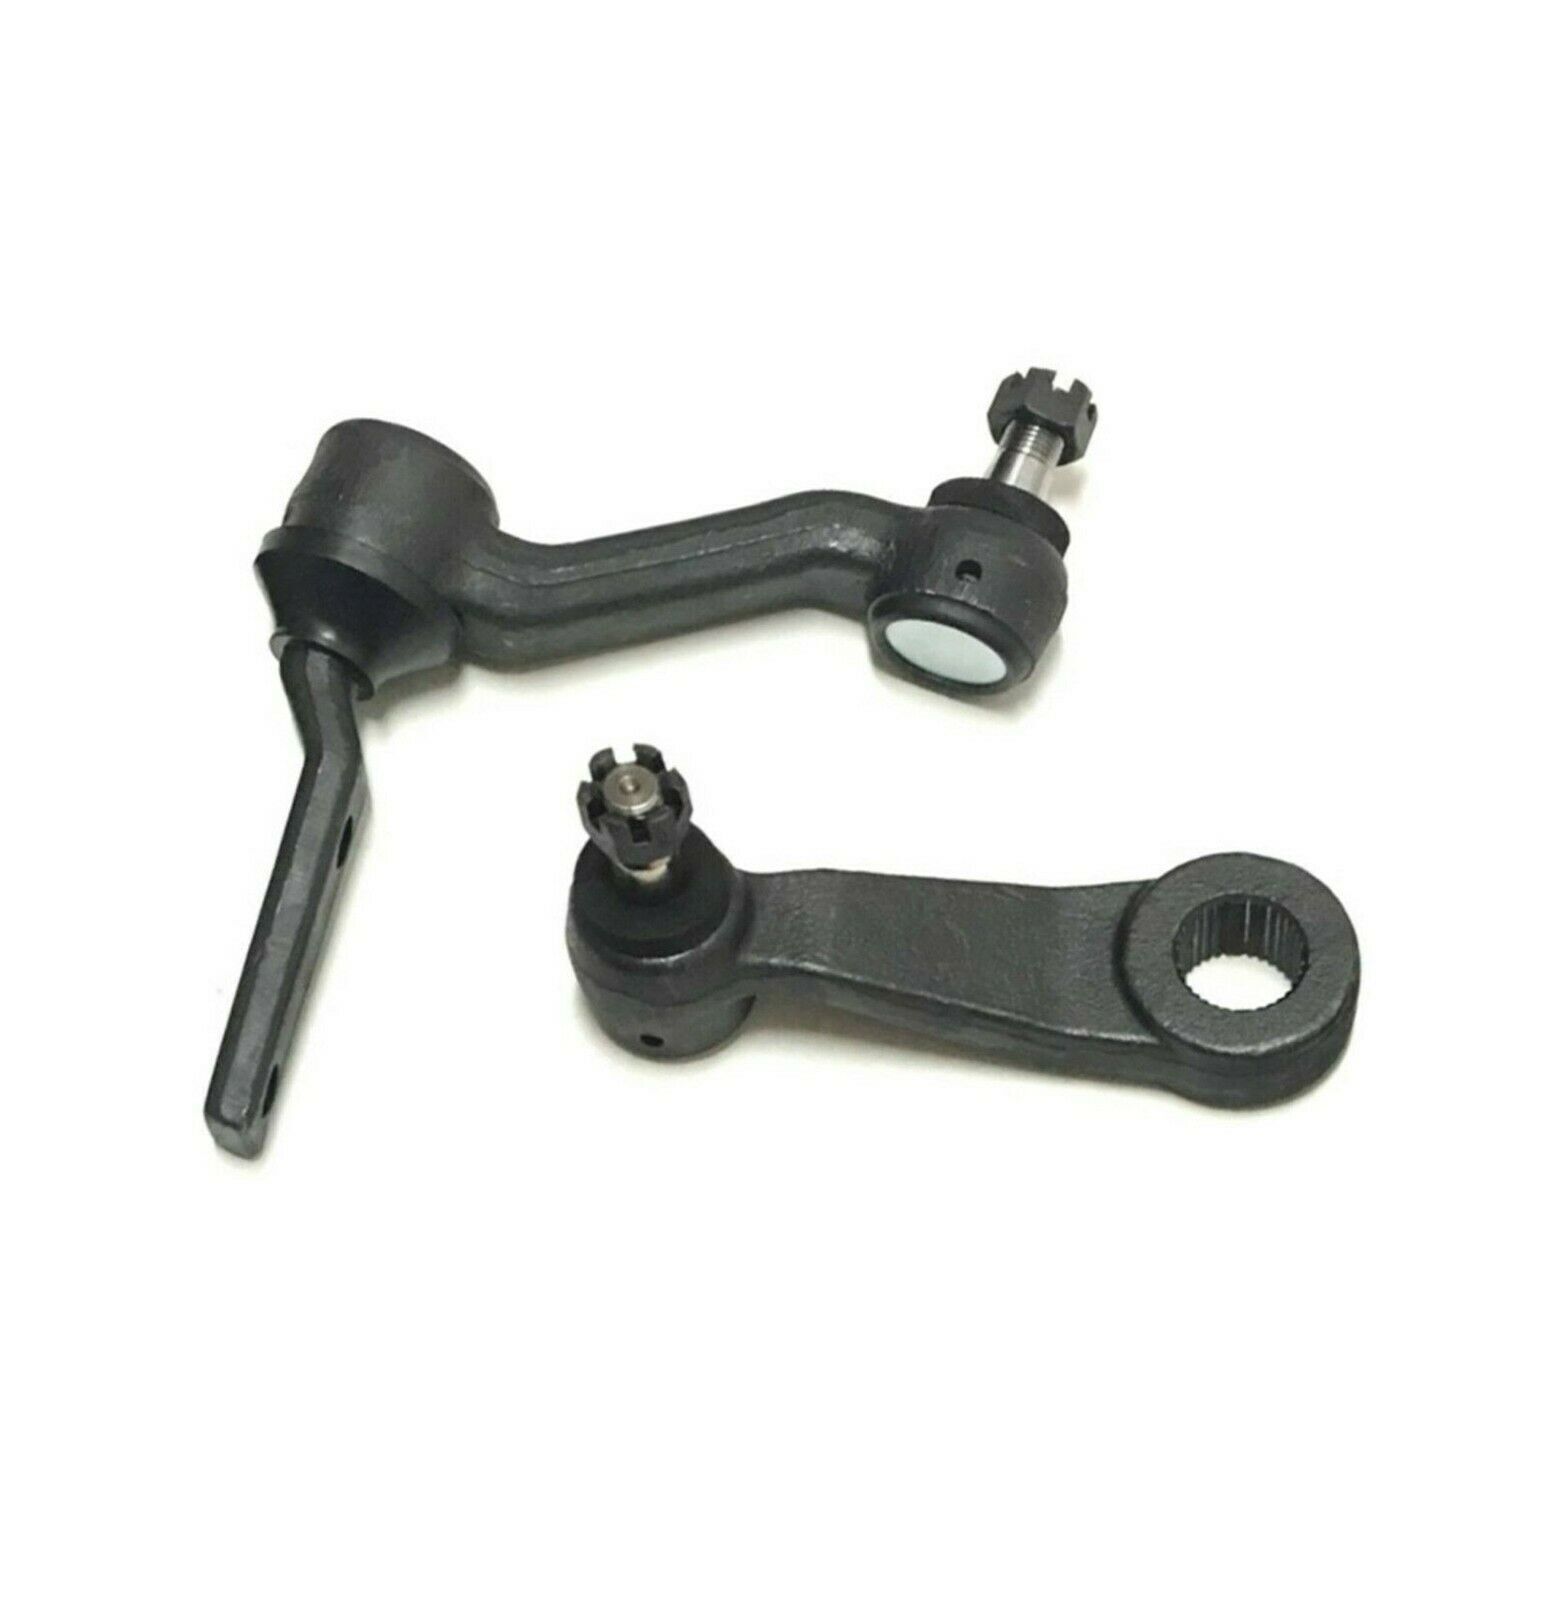 New Steering Idler and Pitman Arm Set for Blazer S10 Jimmy Sonoma Hombre